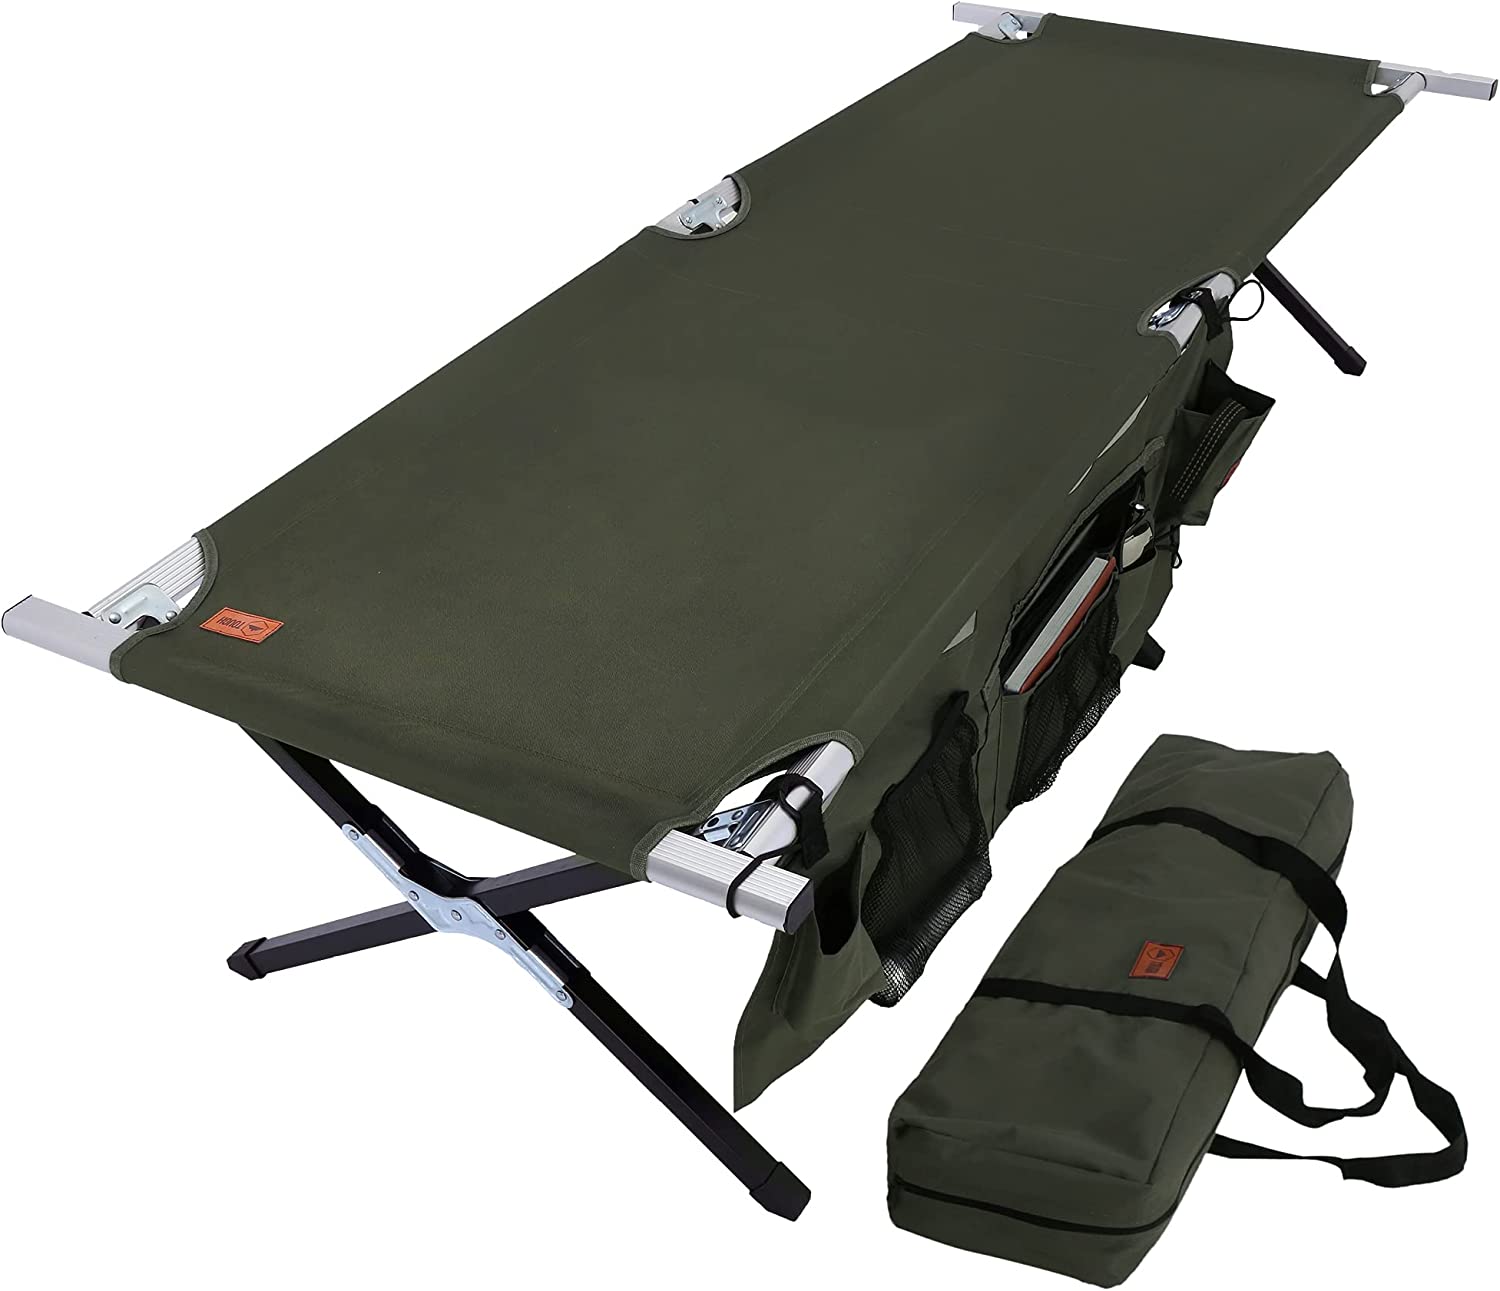 23 Best Camping Cots for Bad Backs on Every Budget in 2023